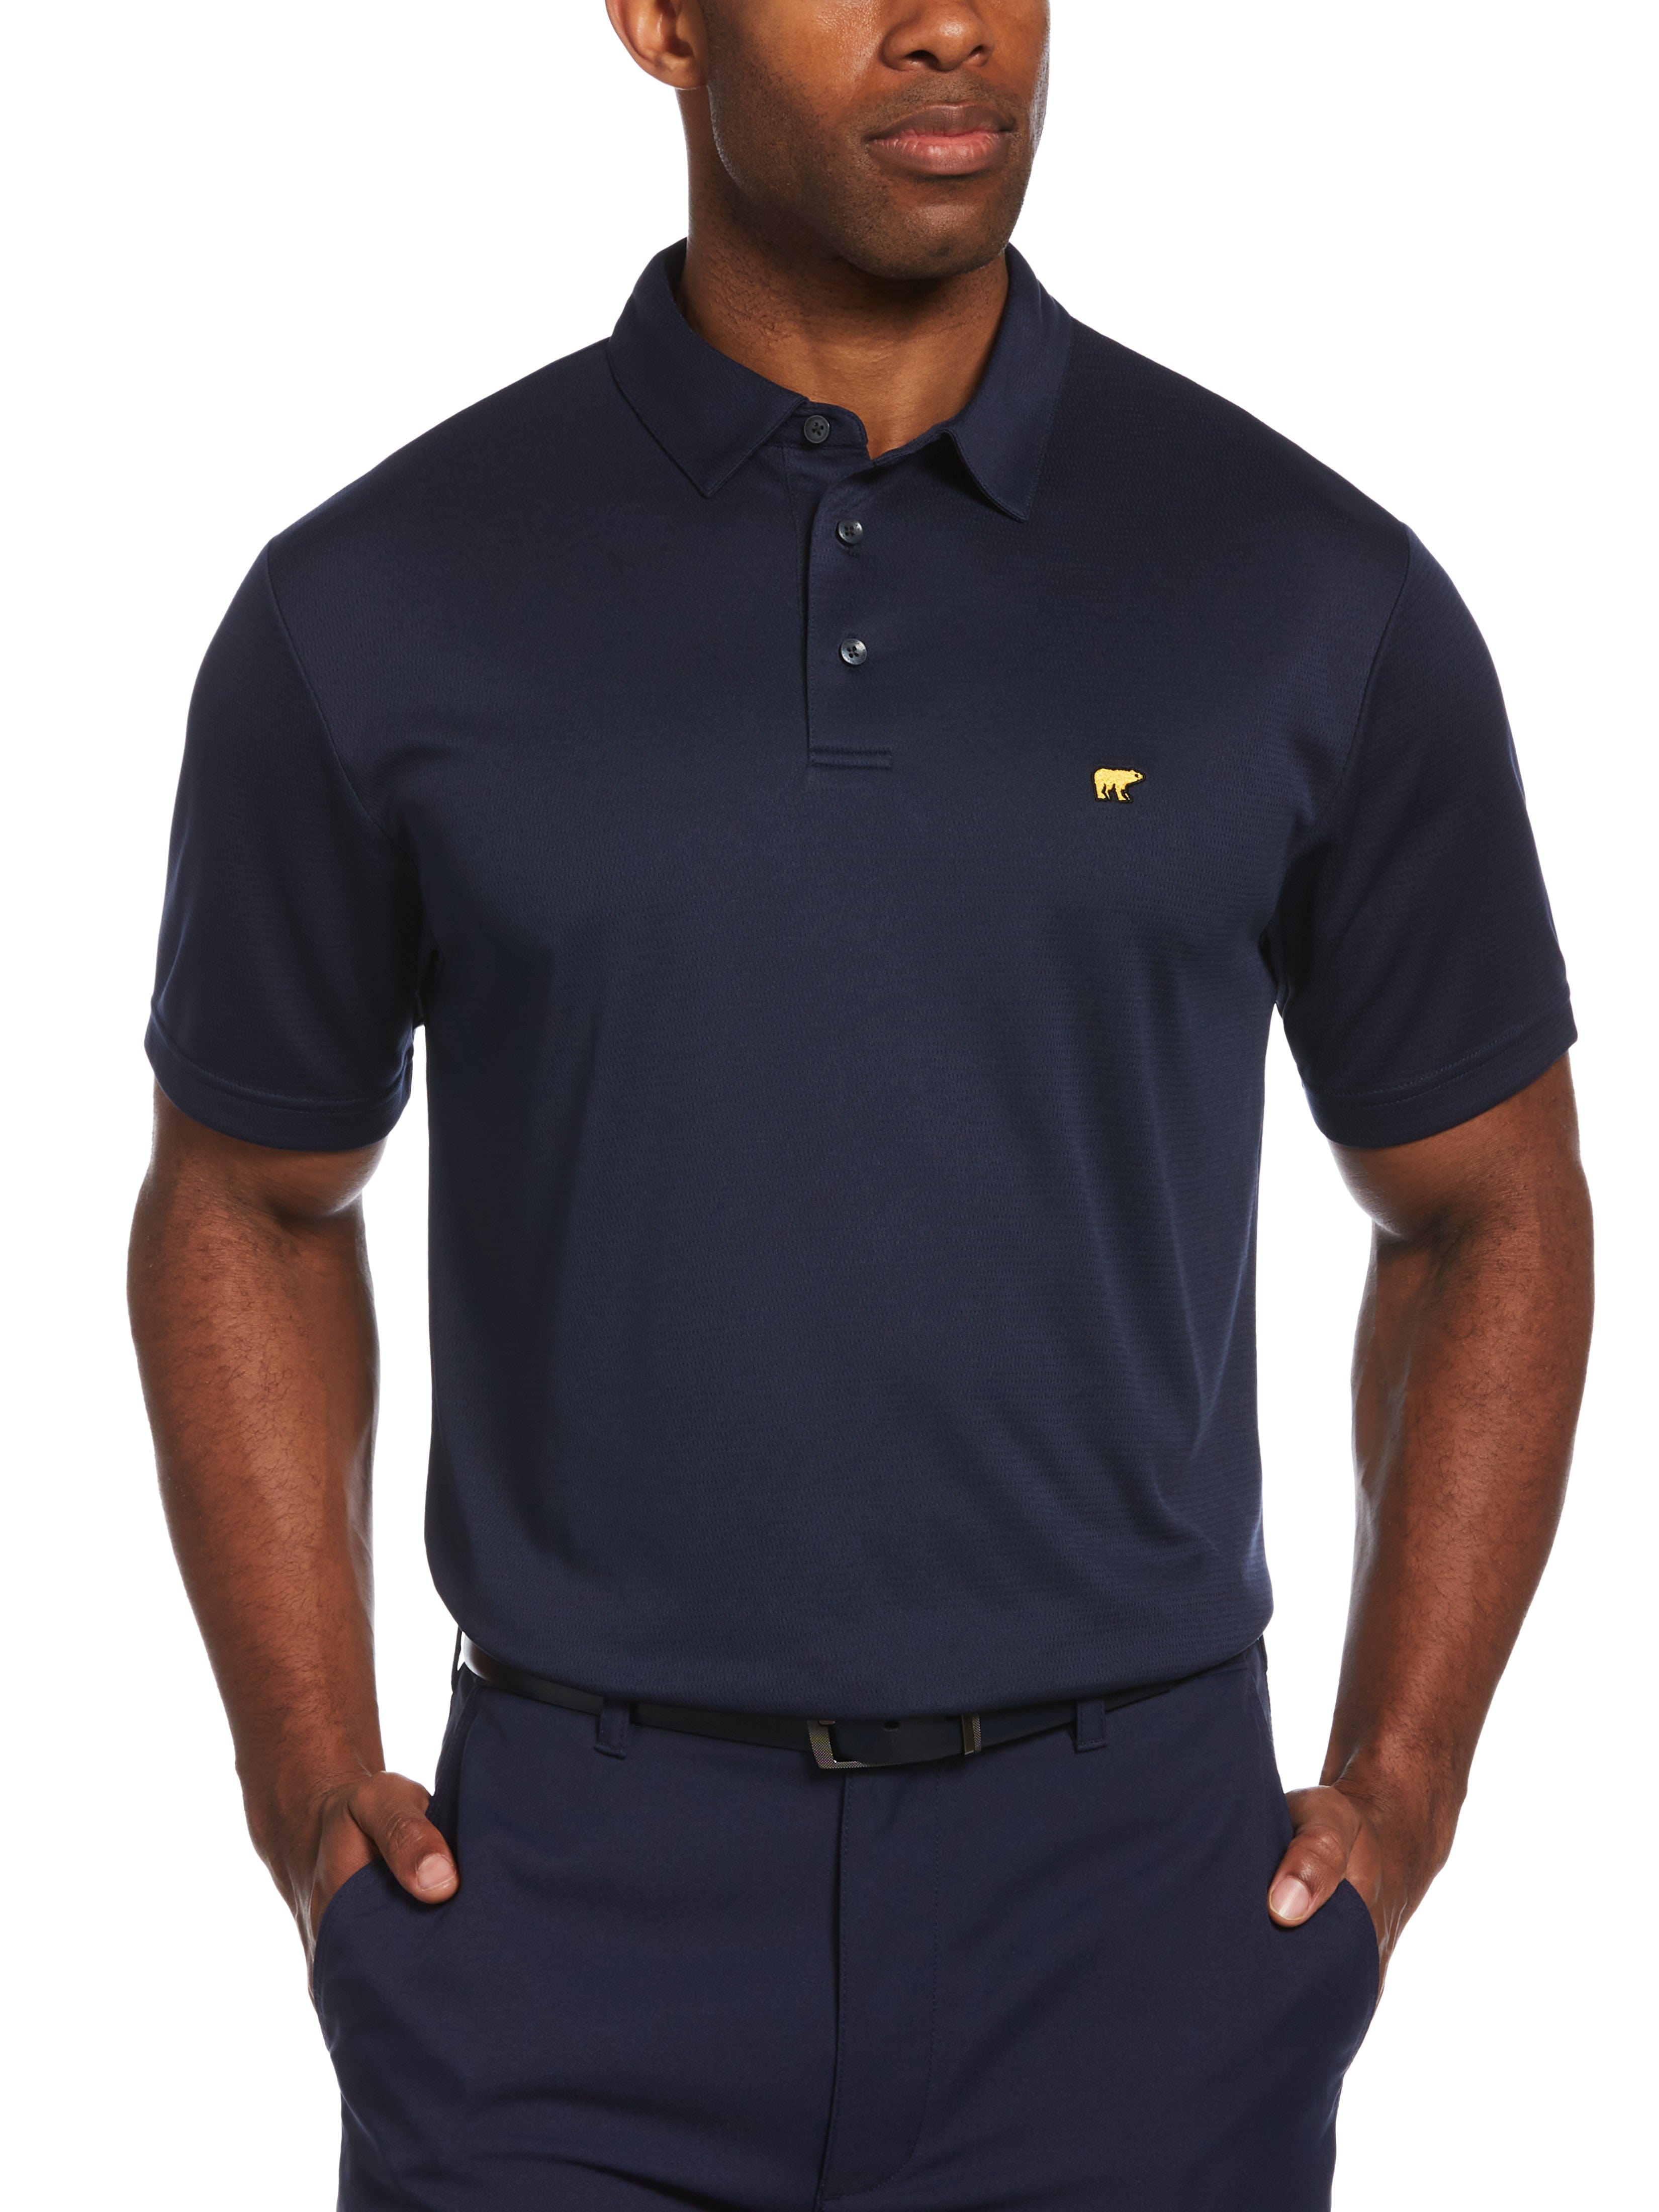 Jack Nicklaus Mens Solid Textured Golf Polo Shirt, Size Small, Classic Navy Blue, 100% Polyester | Golf Apparel Shop